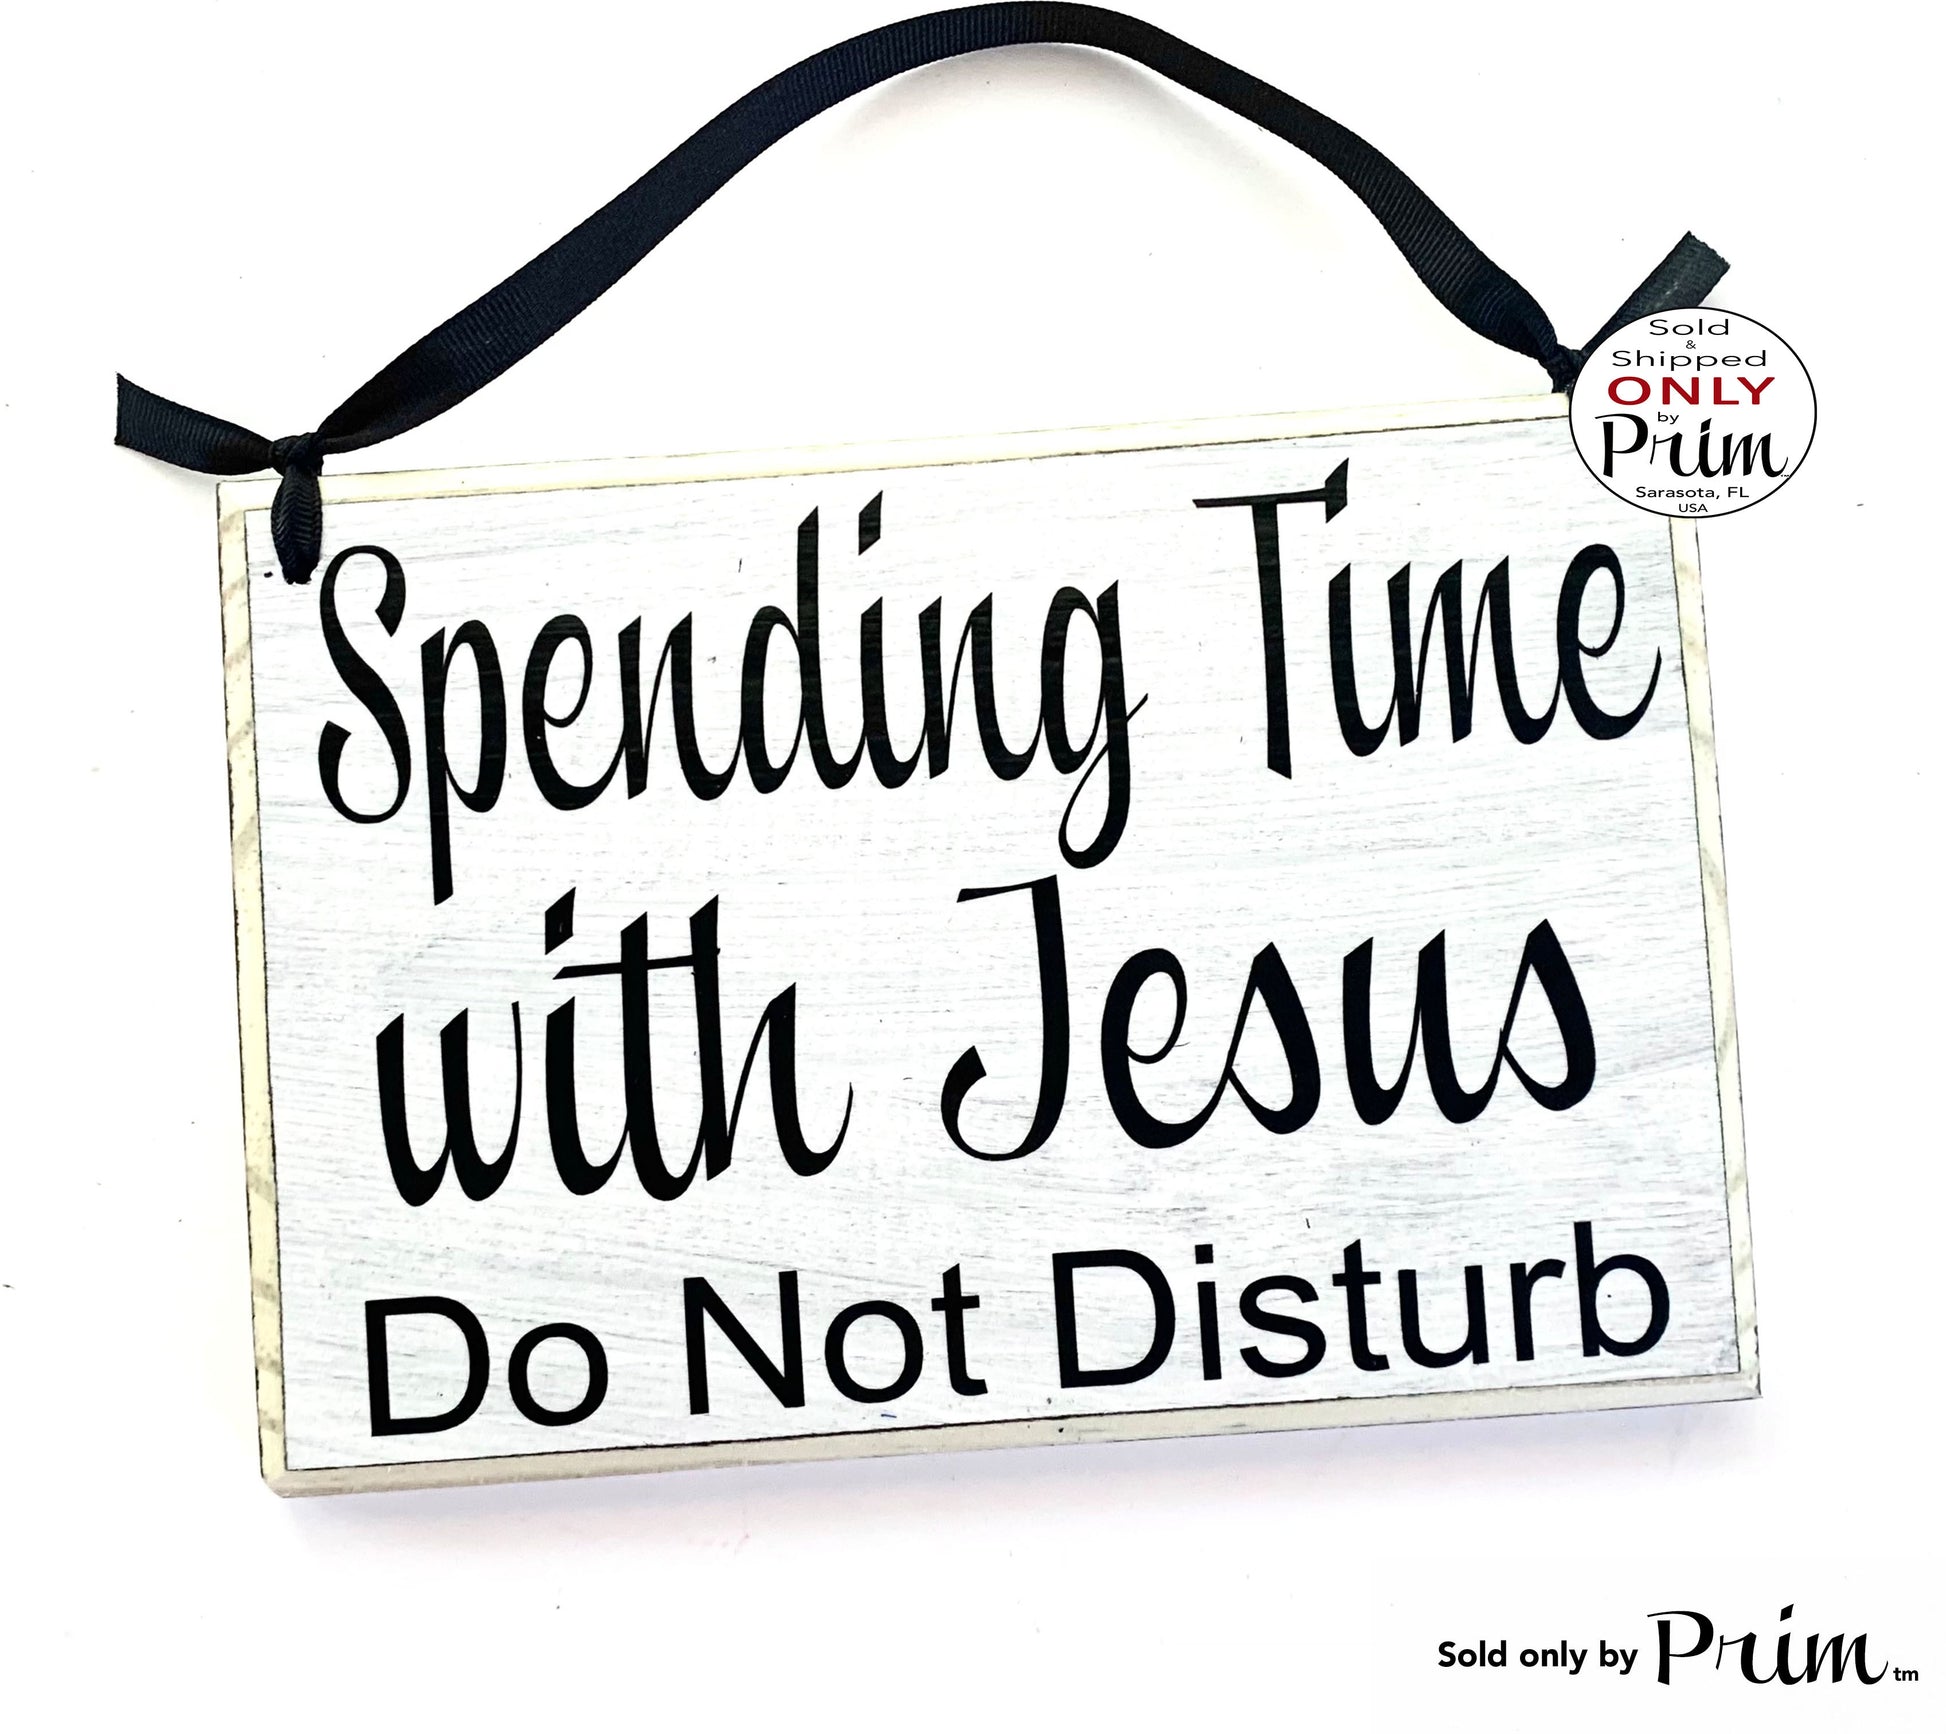 8x6 Spending Time With Jesus Do Not Disturb Custom Wood Sign Please Quiet Prayer In Session Religious Progress Do Not Enter Wall Door Plaque Designs by Prim 